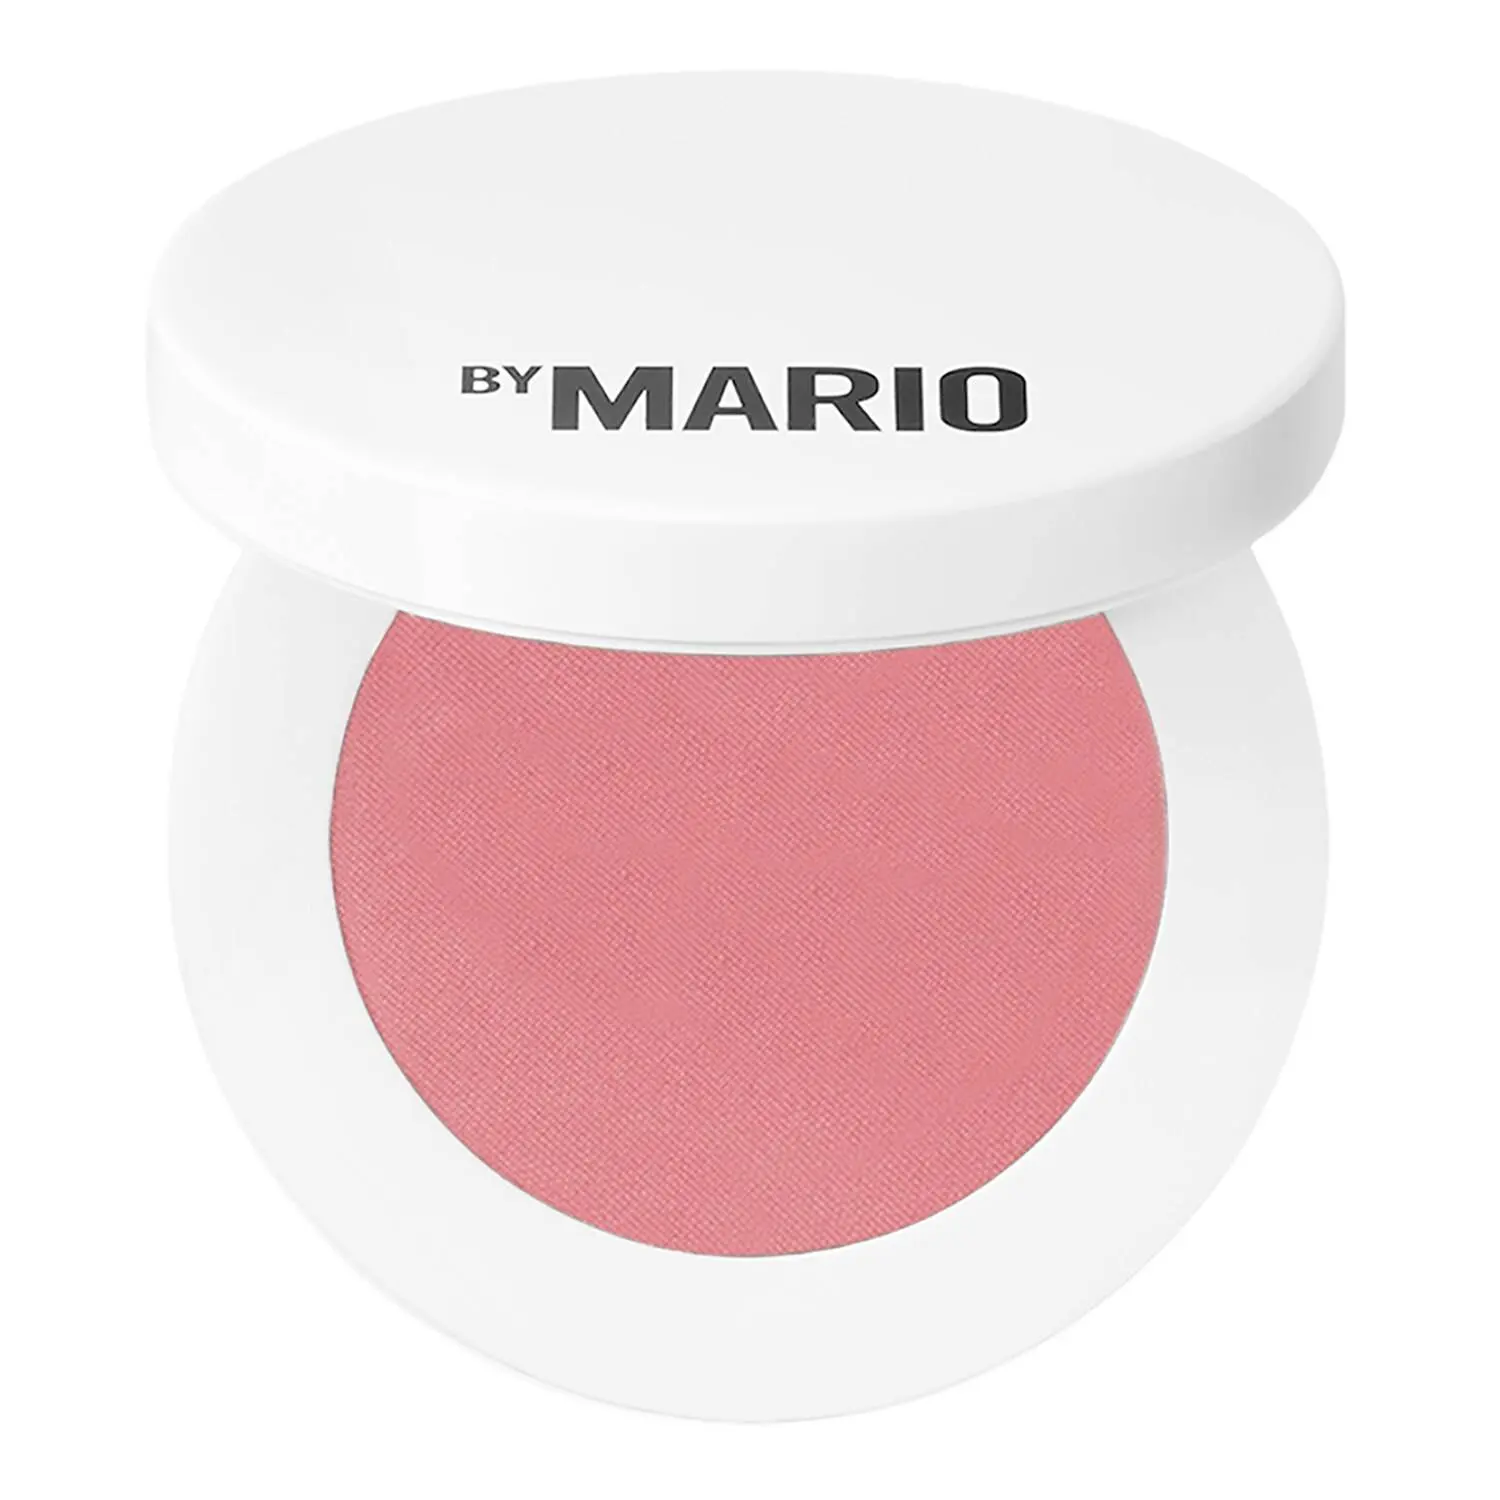 MAKEUP BY MARIO Soft Pop Powder Blush Discounts and Cashback